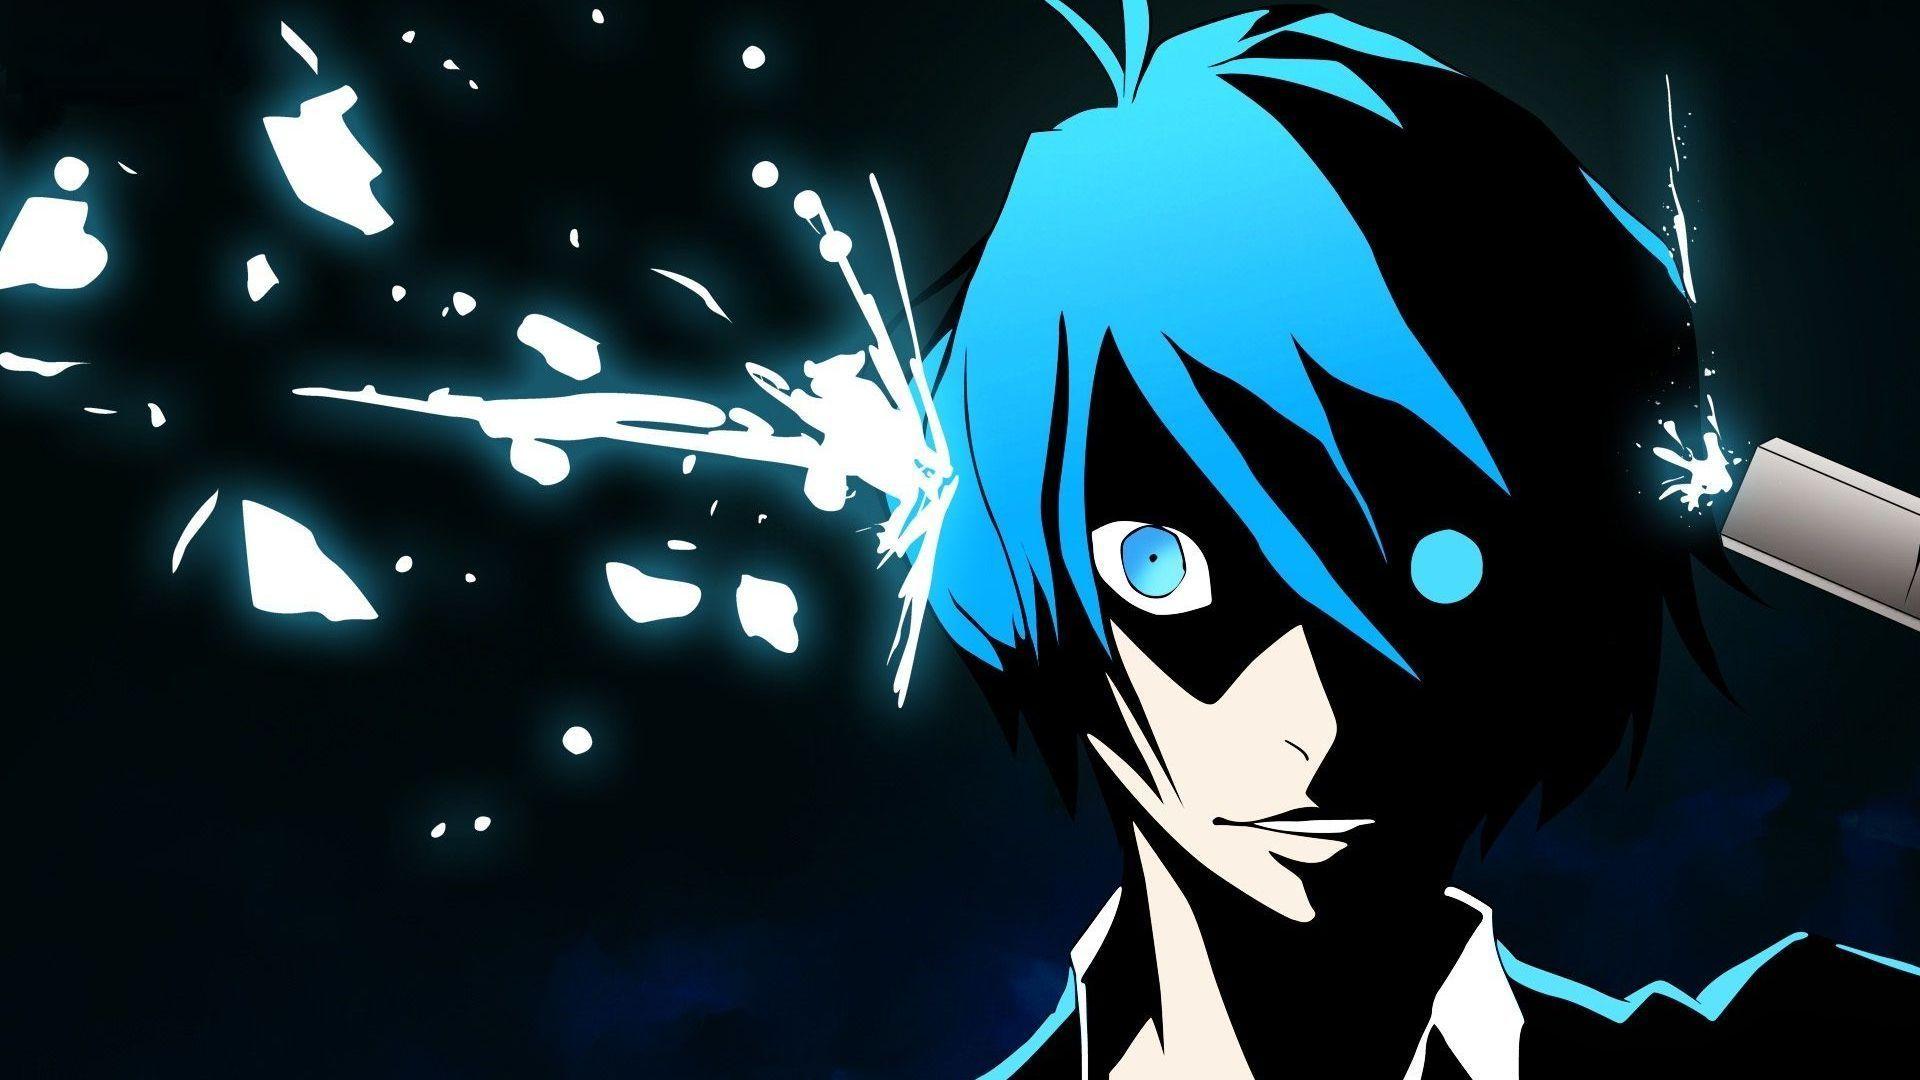 Persona 3 Wallpapers 1920x1080